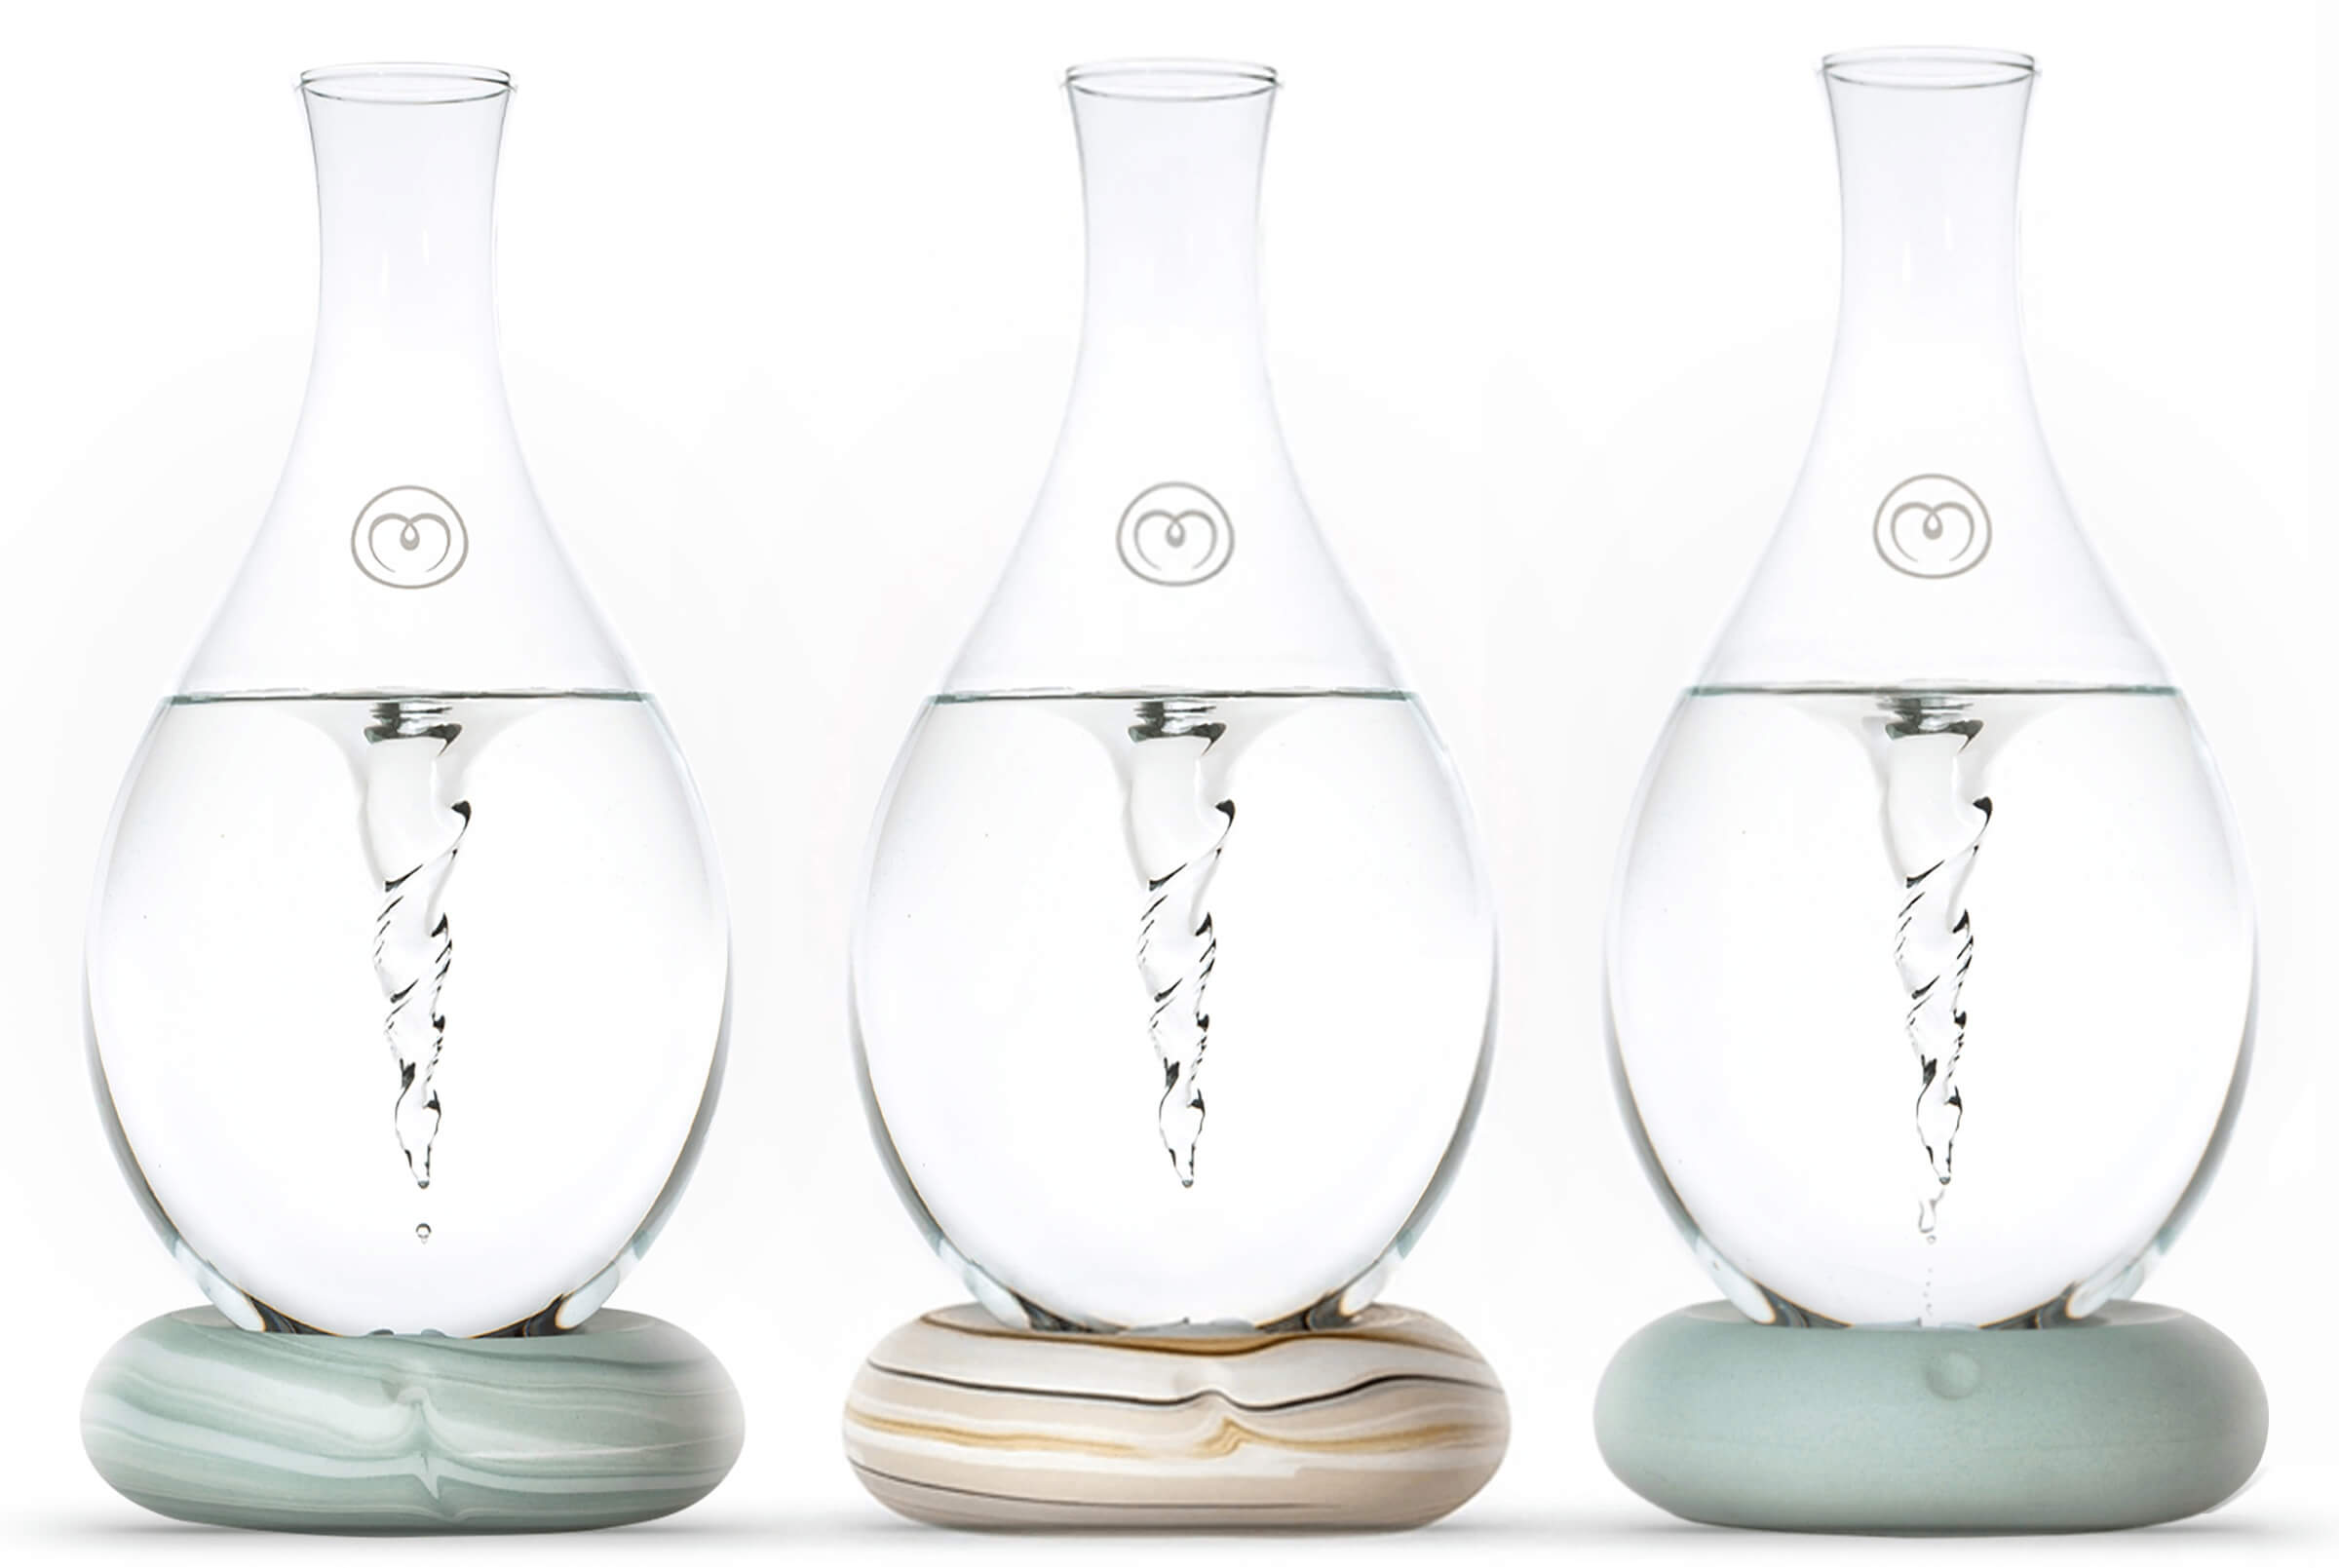 Mayu Swirl - three best and most stunning bedside table glass carafes 